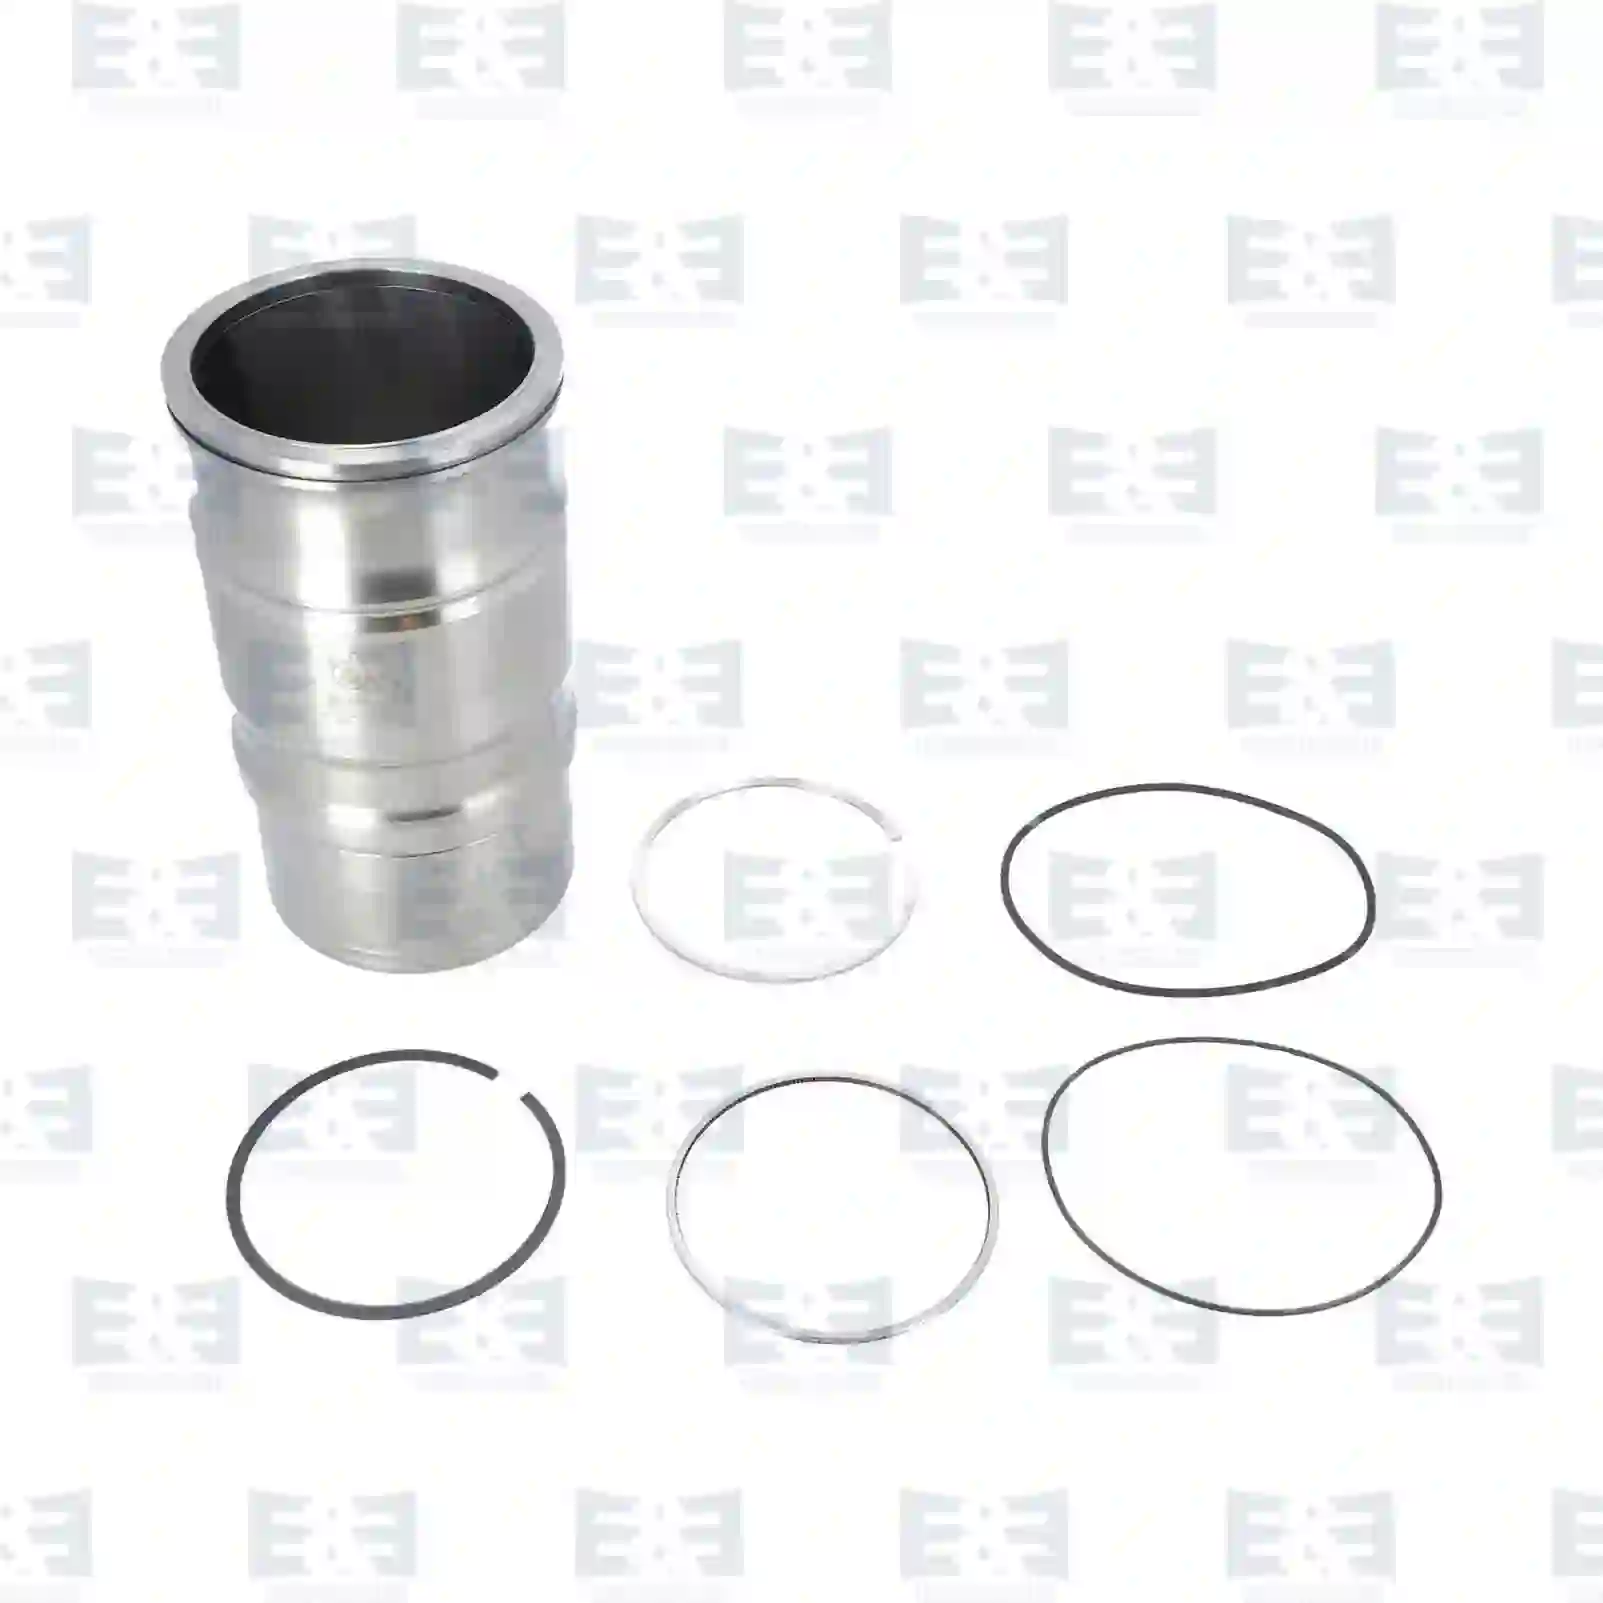 Cylinder liner, with piston rings, 2E2207074, 1726066, 551354, , ||  2E2207074 E&E Truck Spare Parts | Truck Spare Parts, Auotomotive Spare Parts Cylinder liner, with piston rings, 2E2207074, 1726066, 551354, , ||  2E2207074 E&E Truck Spare Parts | Truck Spare Parts, Auotomotive Spare Parts